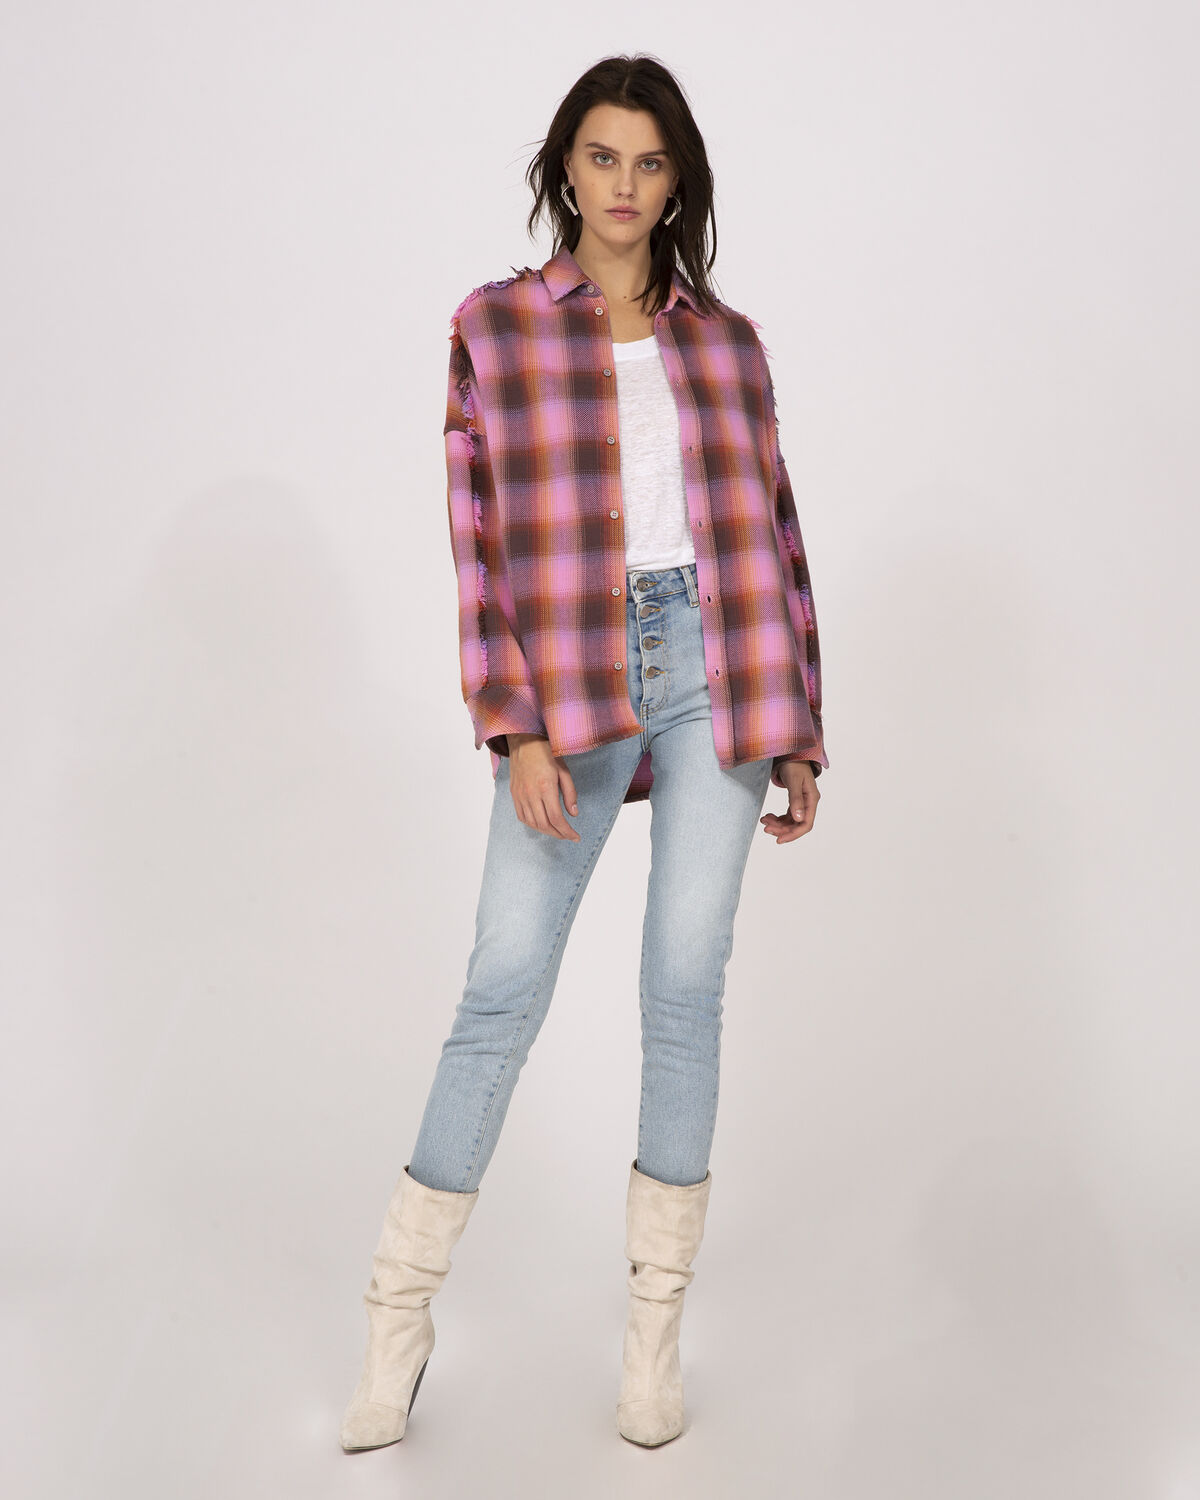 Photo of IRO Paris Julos Shirt Pink - Go For A Colourful Silhouette With This Pink Plaid Shirt With Fringe Details. Oversize, Combine It With High Waist Jeans And Boots For An Effortless Look. Shirts-Tops